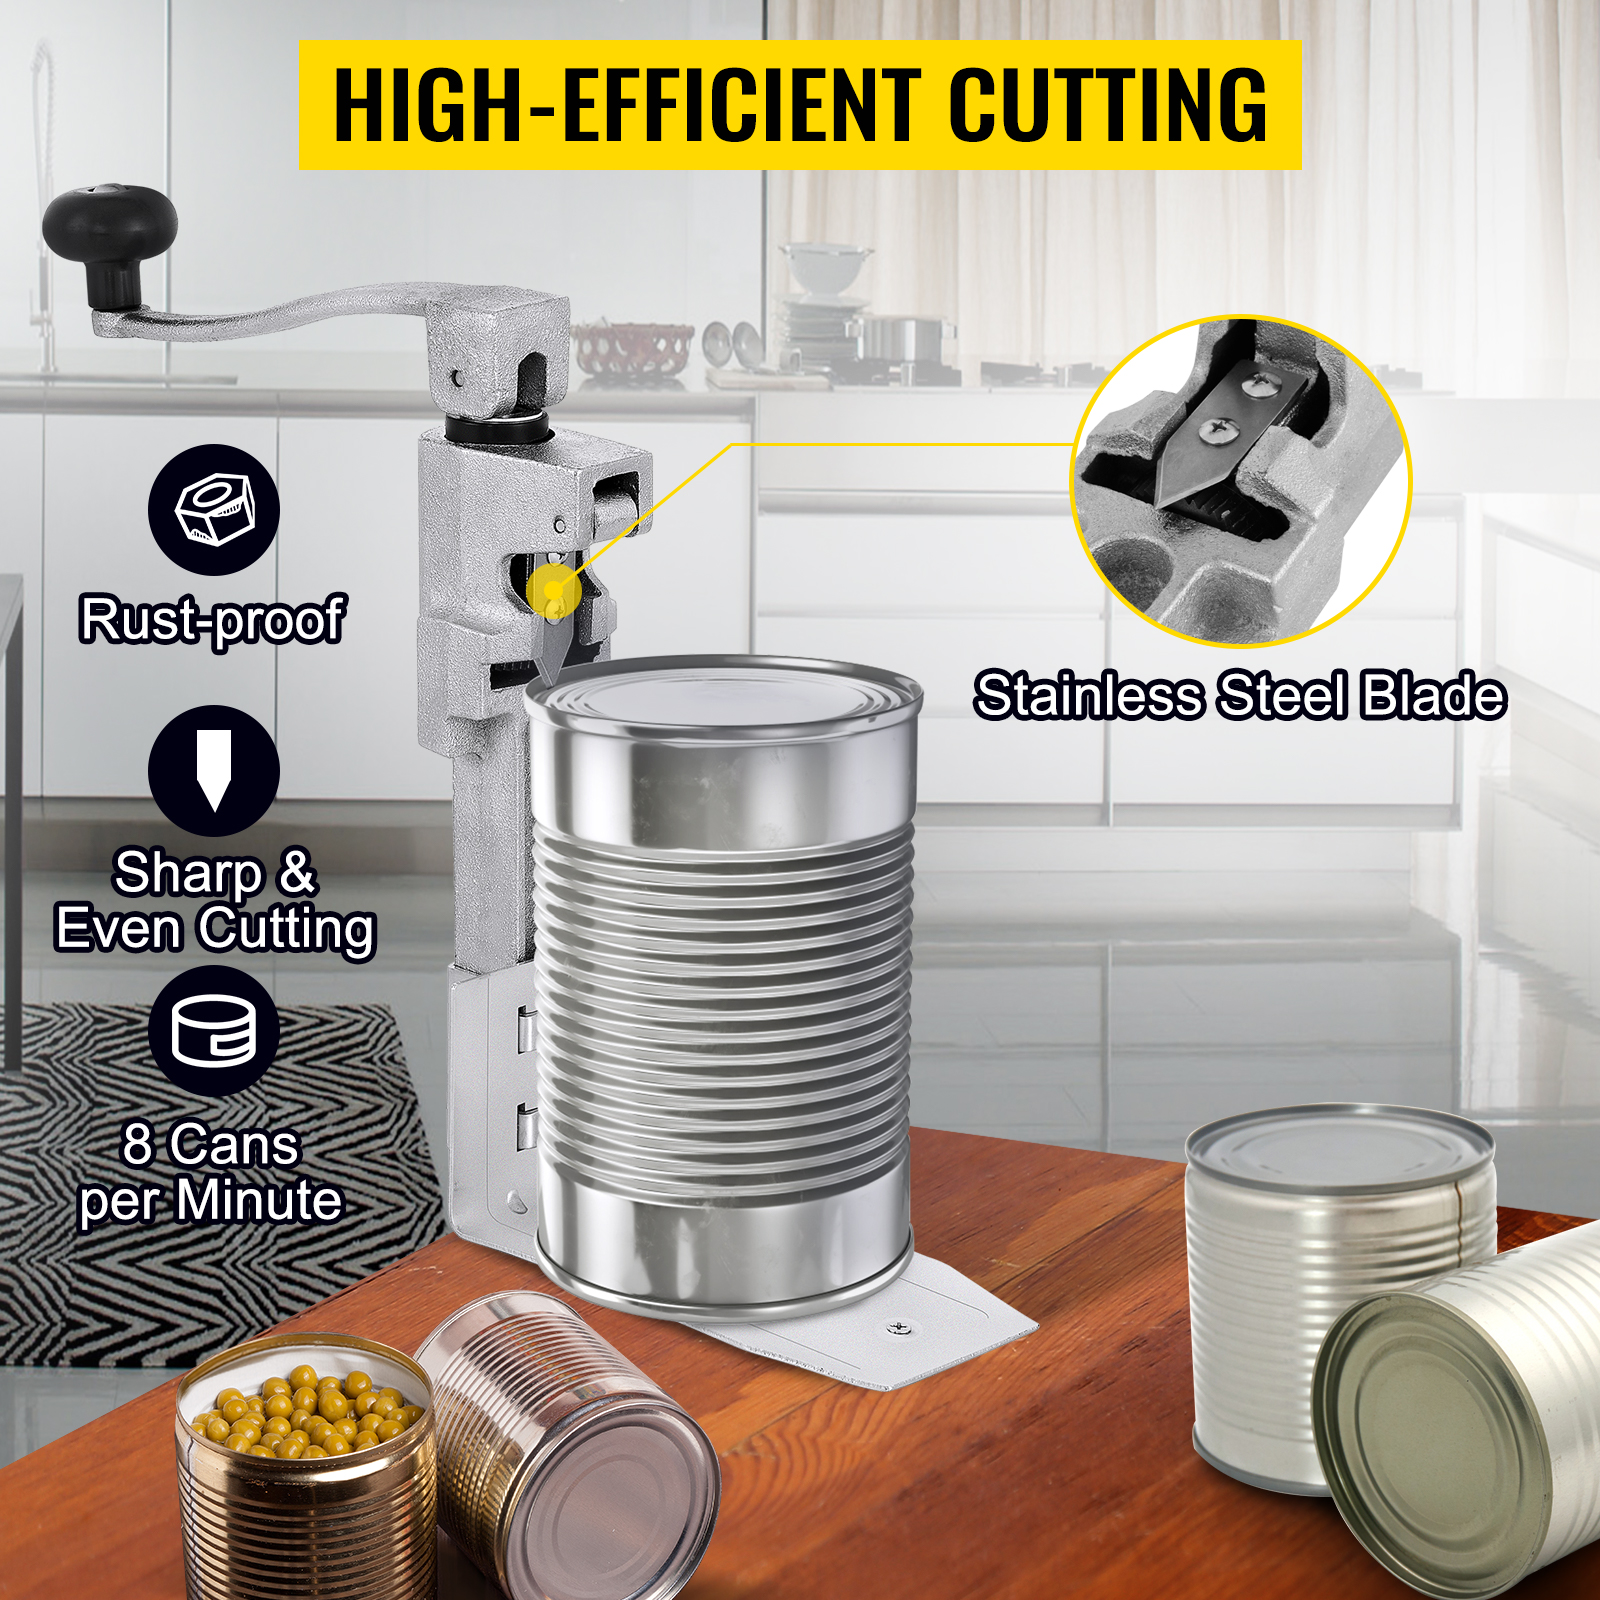 https://d2qc09rl1gfuof.cloudfront.net/product/TSSDKGQ0000000001/commercial-can-opener-m100-2.jpg